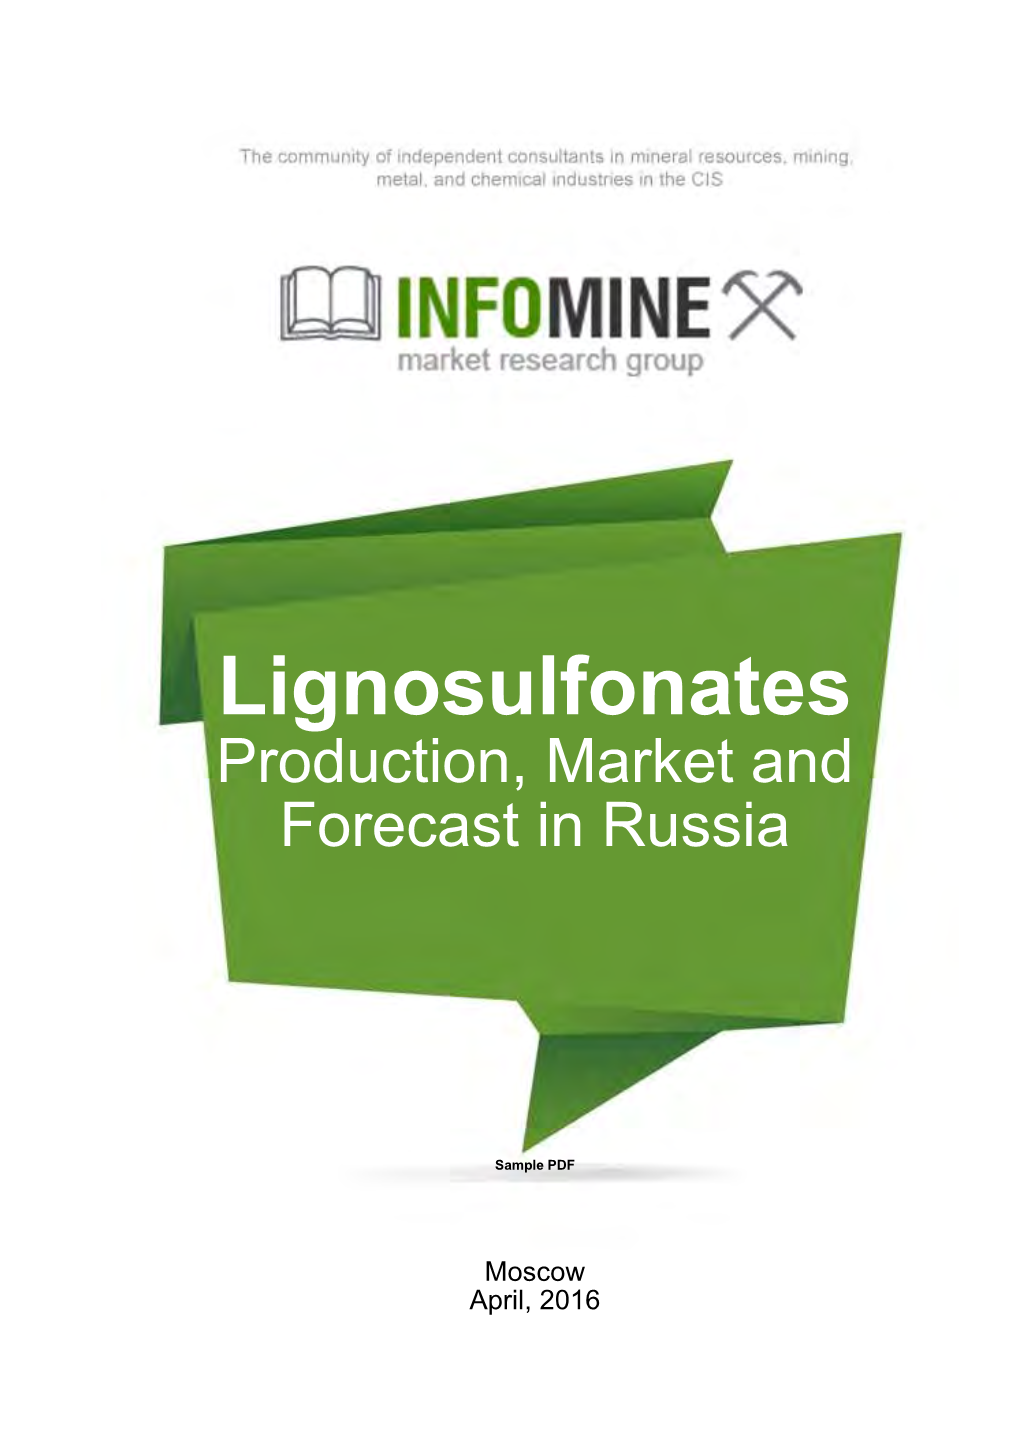 Lignosulfonates Production, Market and Forecast in Russia